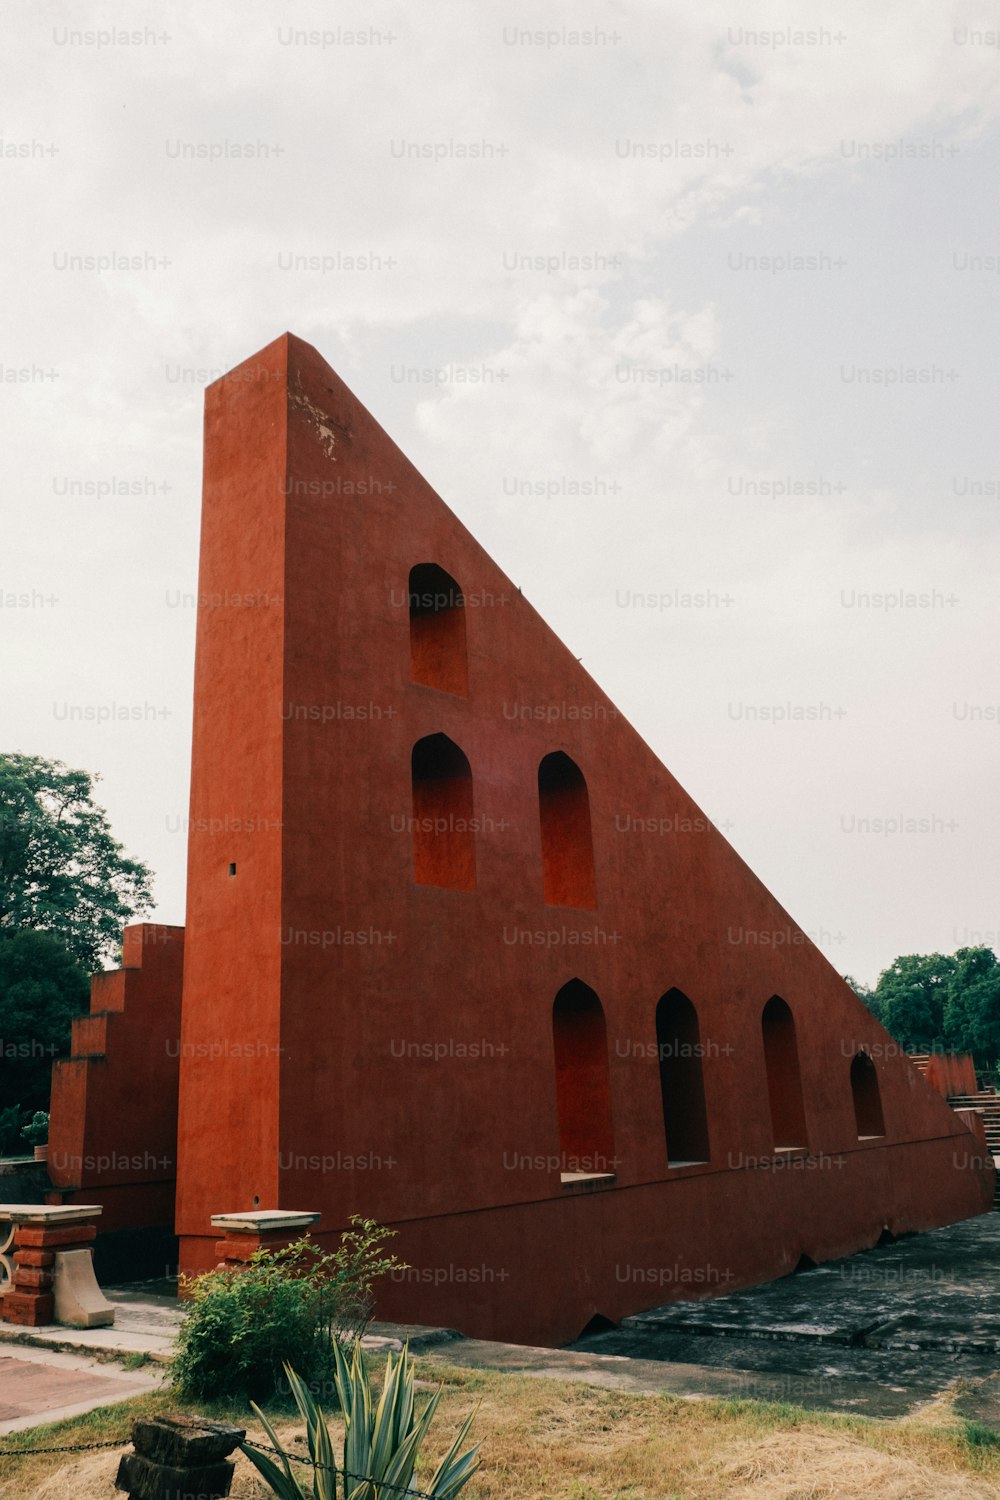 a large red building with a triangular shape on top of it